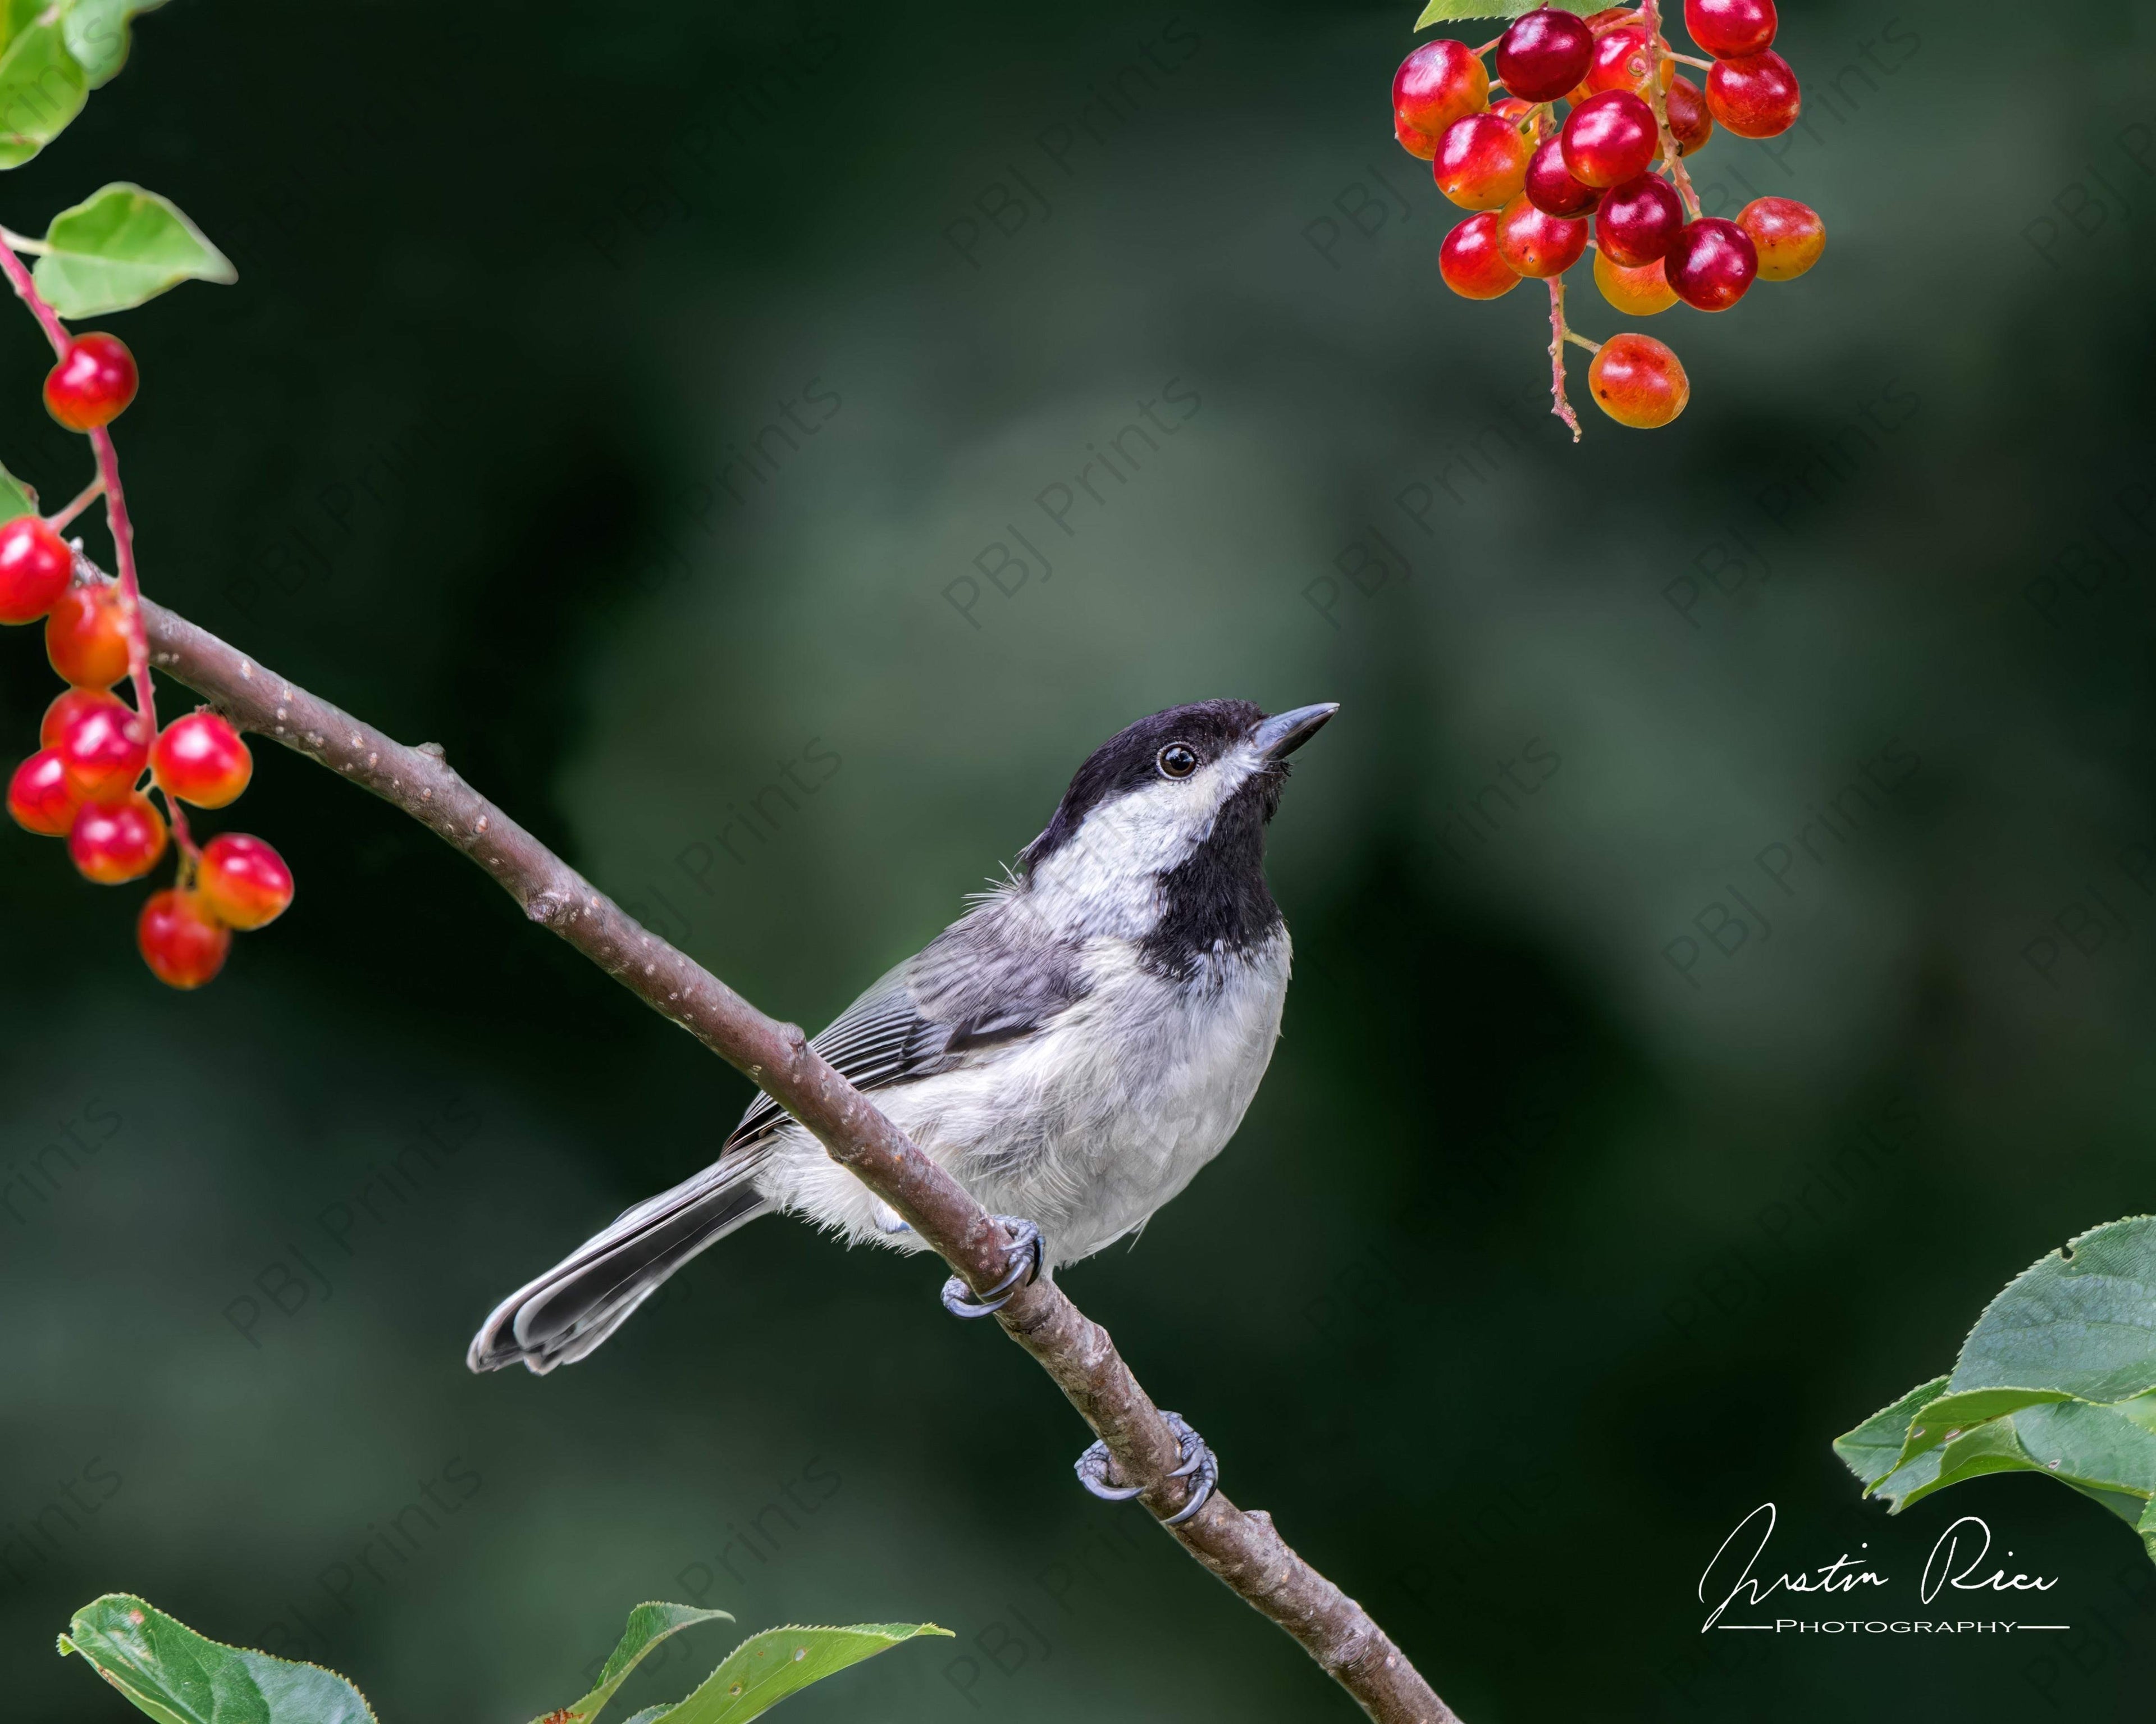 Chickadee and Berries - Artist by Justin Rice - Art Prints, Decoupage Rice Paper, Flat Canvas Prints, Giclee Prints, Photo Prints, Poster Prints